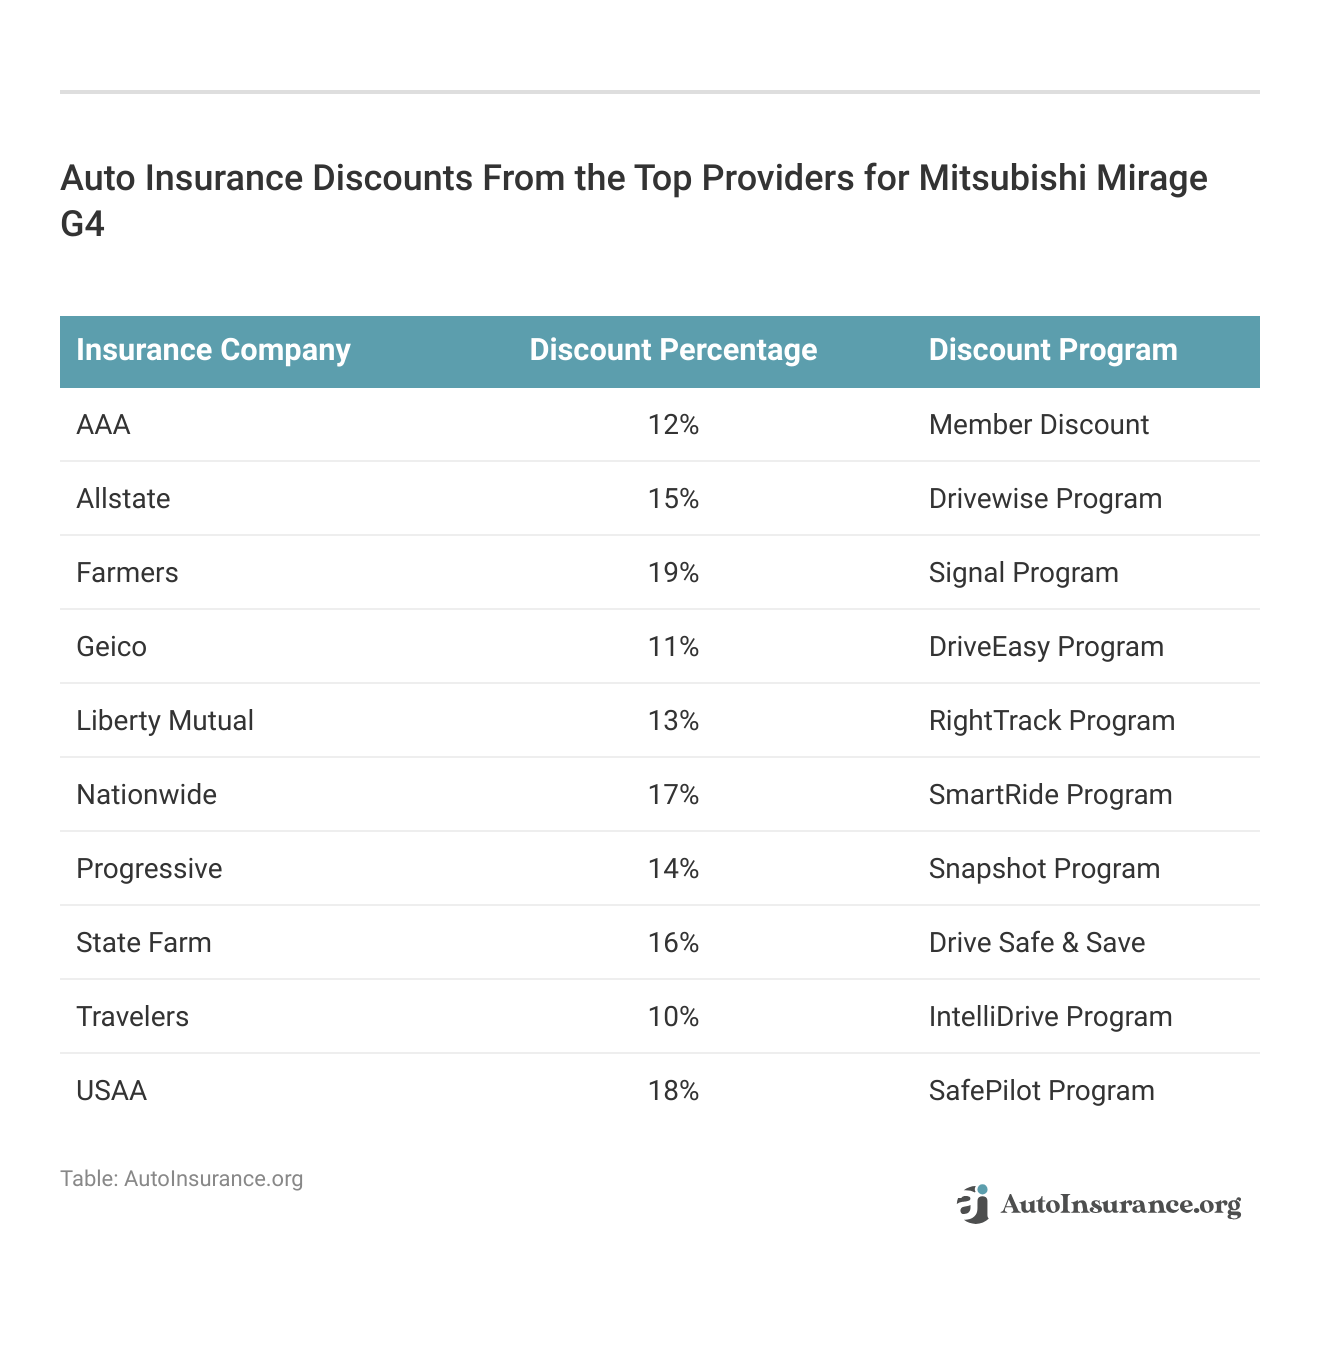 <h3>Auto Insurance Discounts From the Top Providers for Mitsubishi Mirage G4</h3>